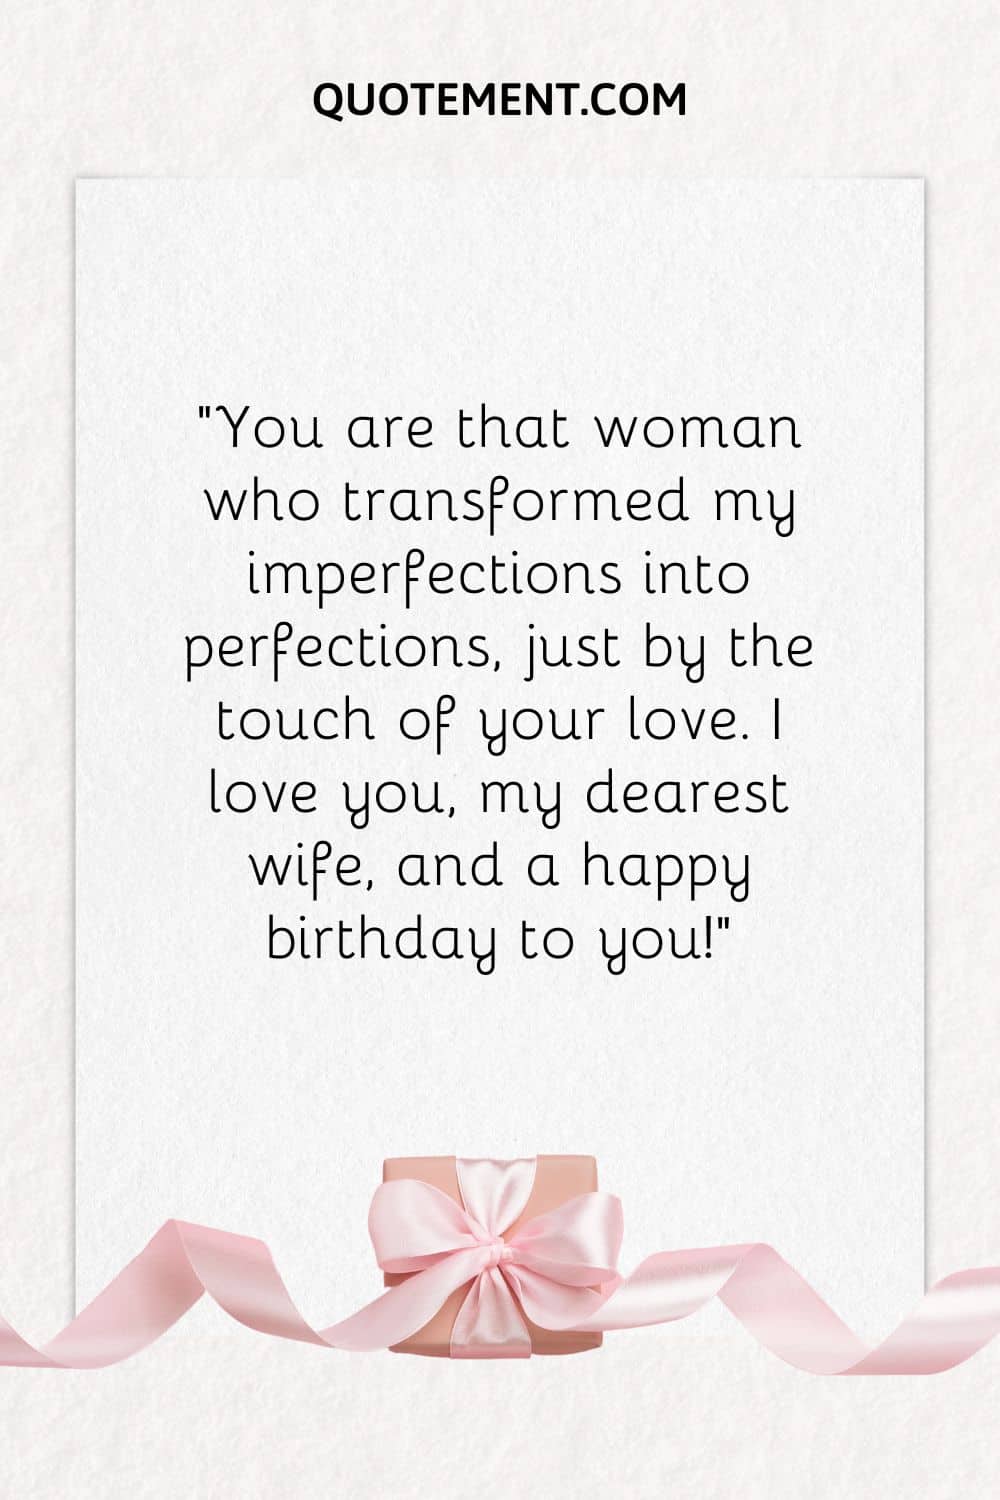 “You are that woman who transformed my imperfections into perfections, just by the touch of your love. I love you, my dearest wife, and a happy birthday to you!”